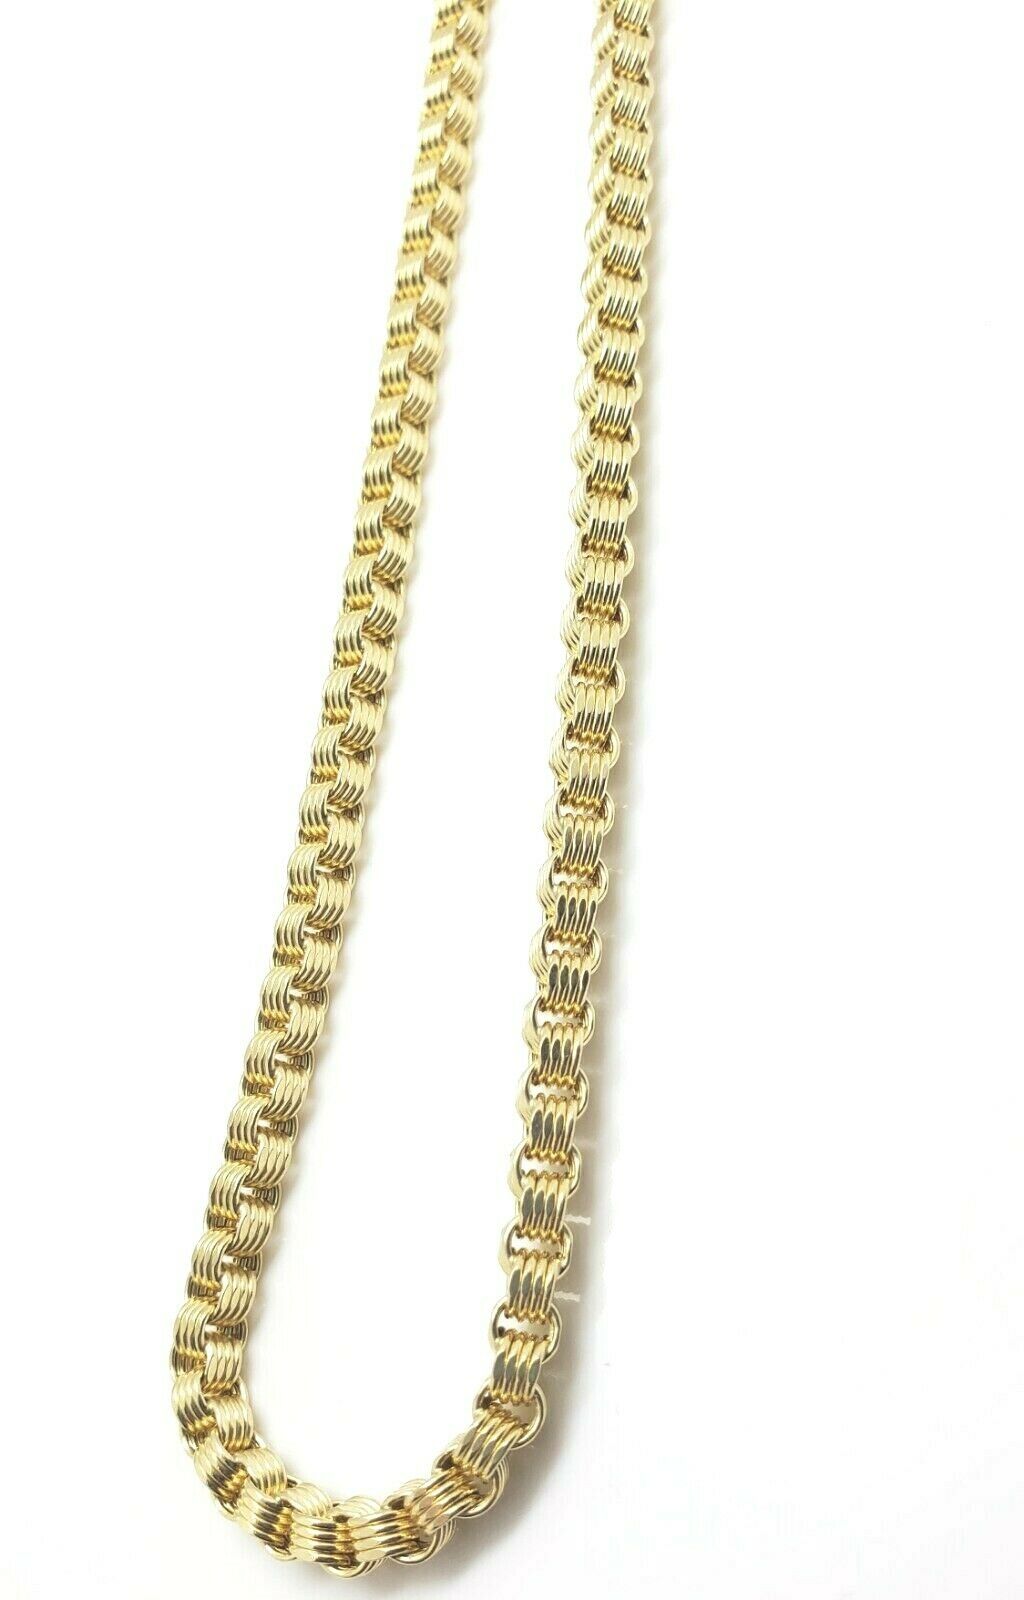 10k Gold Mens Necklace Byzantine Chain 24 Inch Lobster 4mm Male Yellow Gold REAL